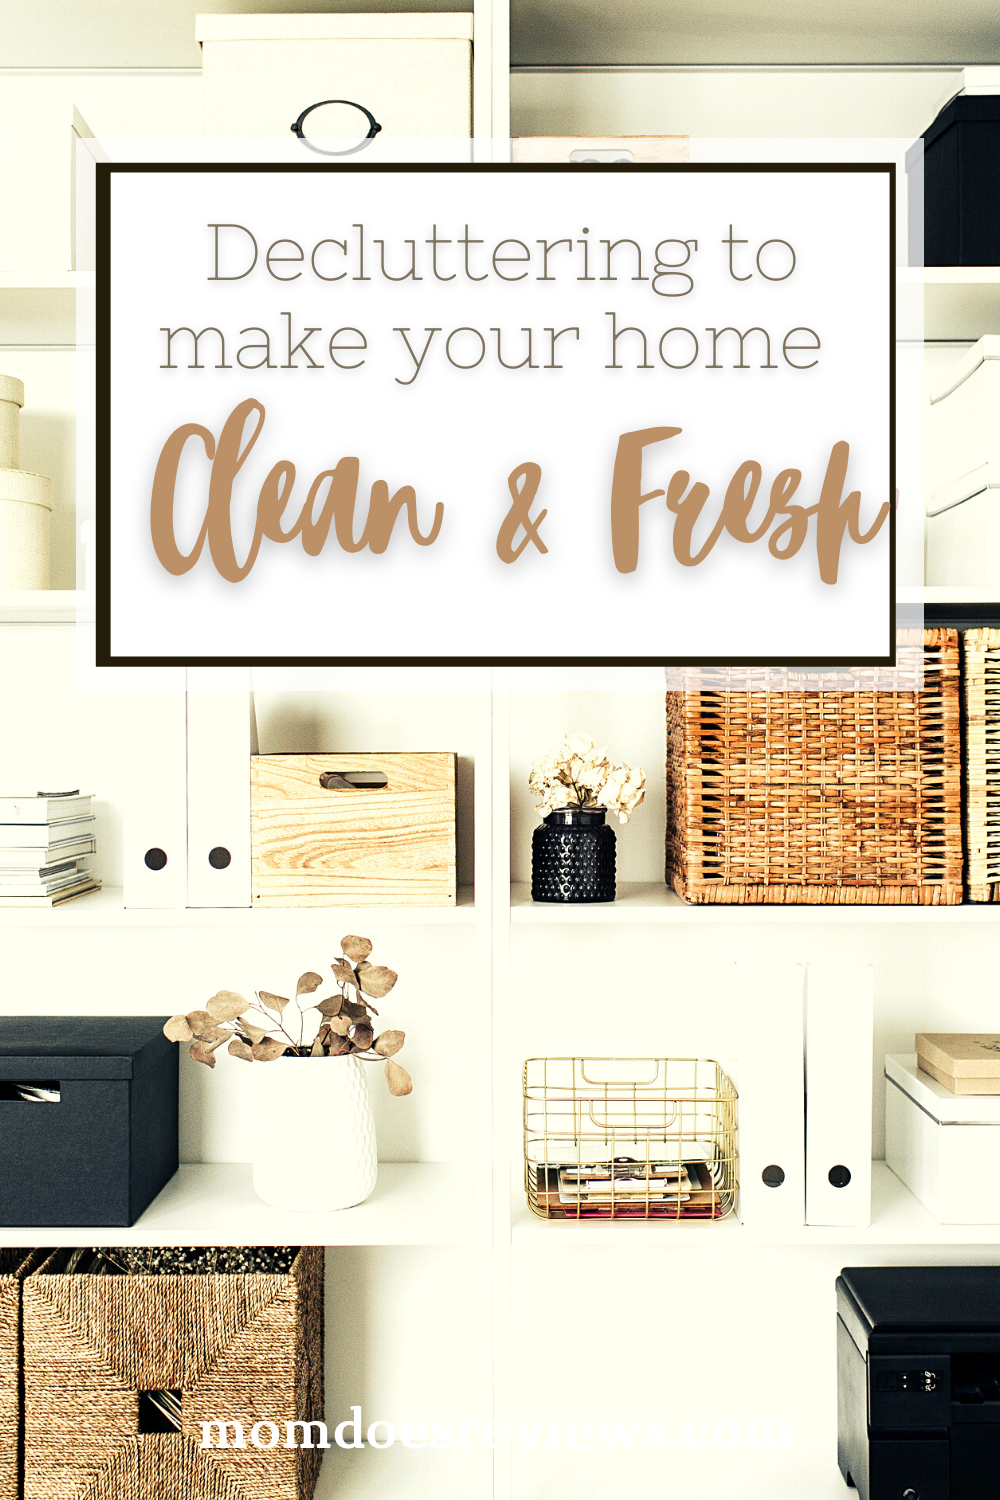 How To Make Your House Clean And Fresh